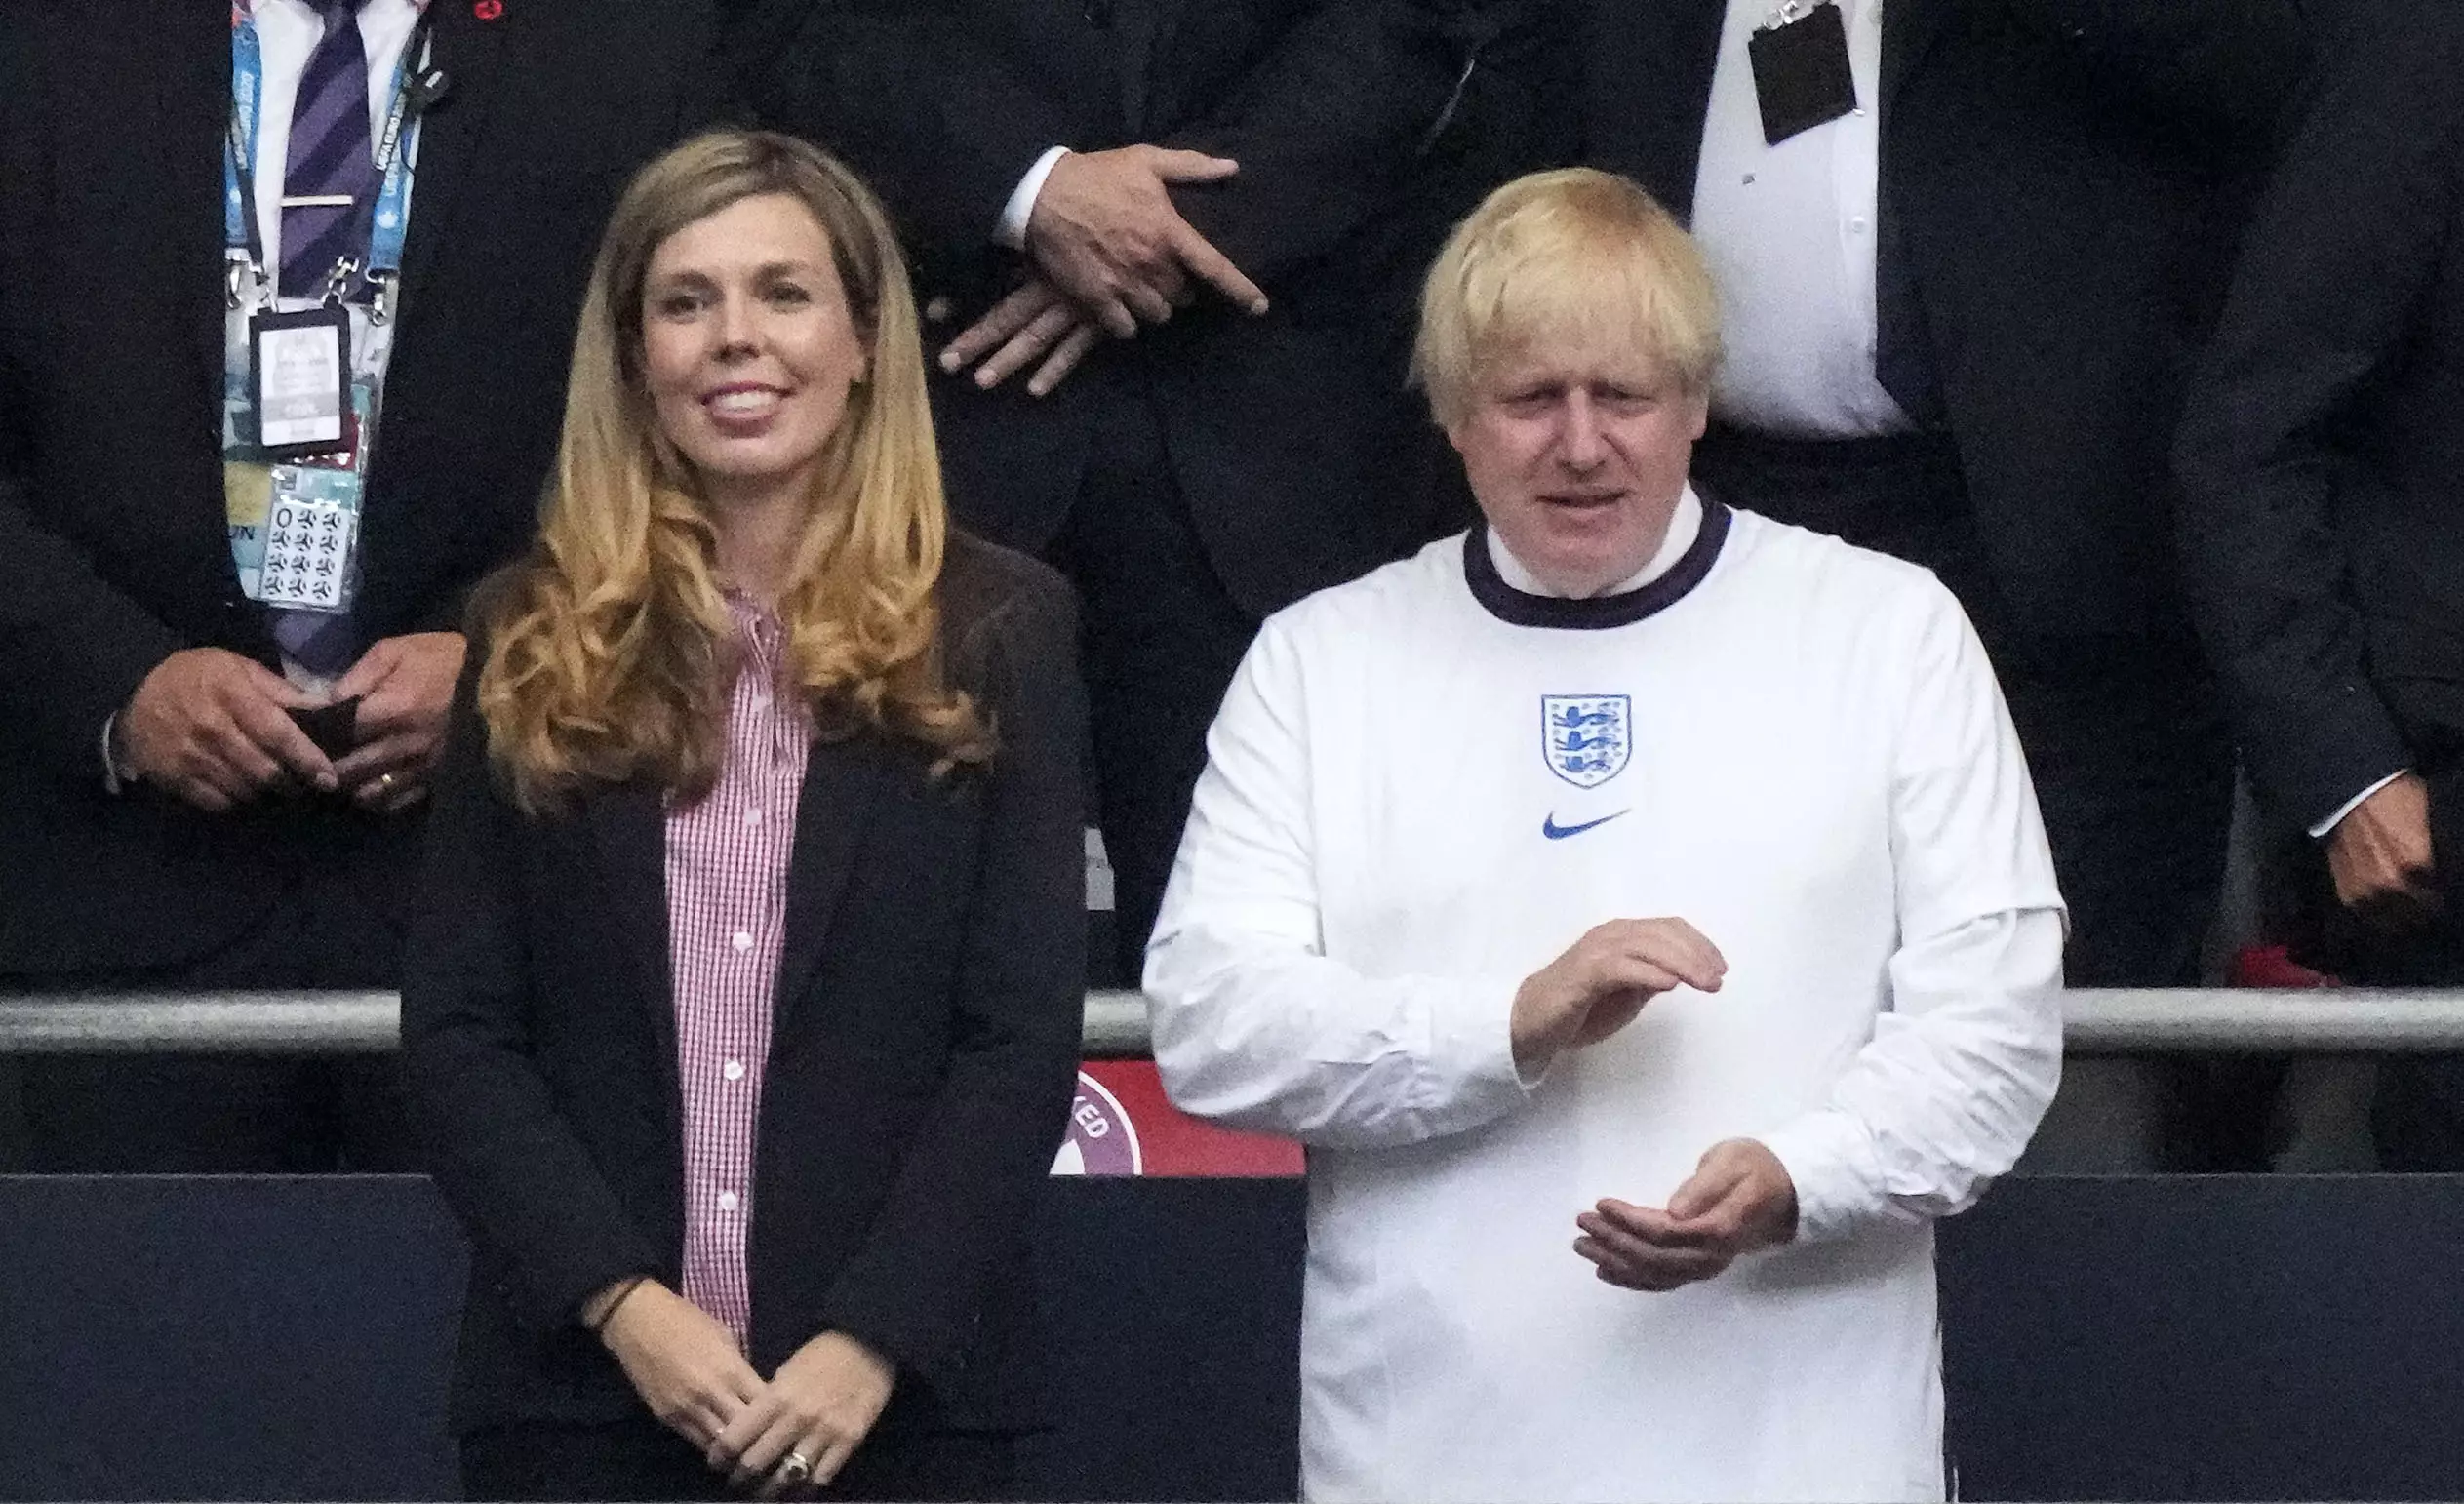 Johnson was at the game on Sunday wearing an England shirt over his shirt, but he doesn't do gestures. Image: PA Images